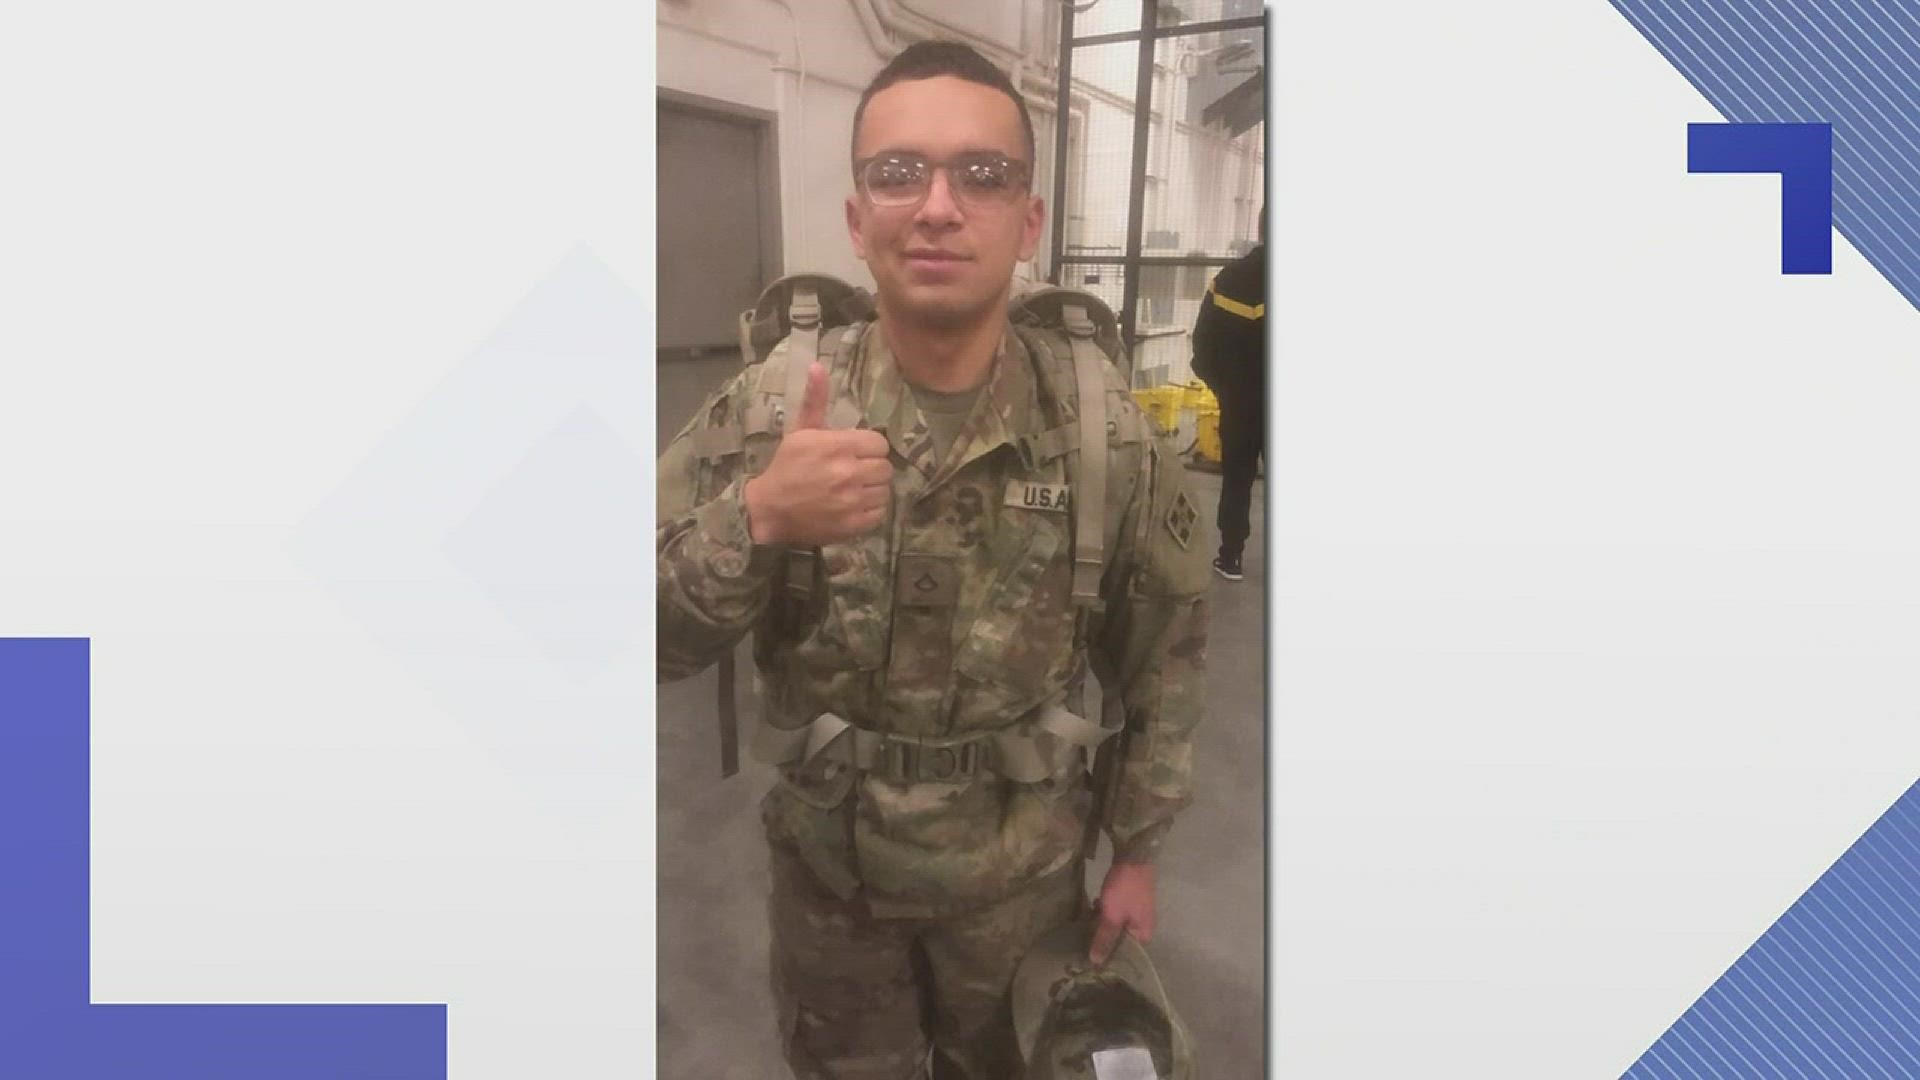 Spc. Michael T. Osorio was from Horseshoe Bend, Idaho. He had been at Fort Carson since May 2018.